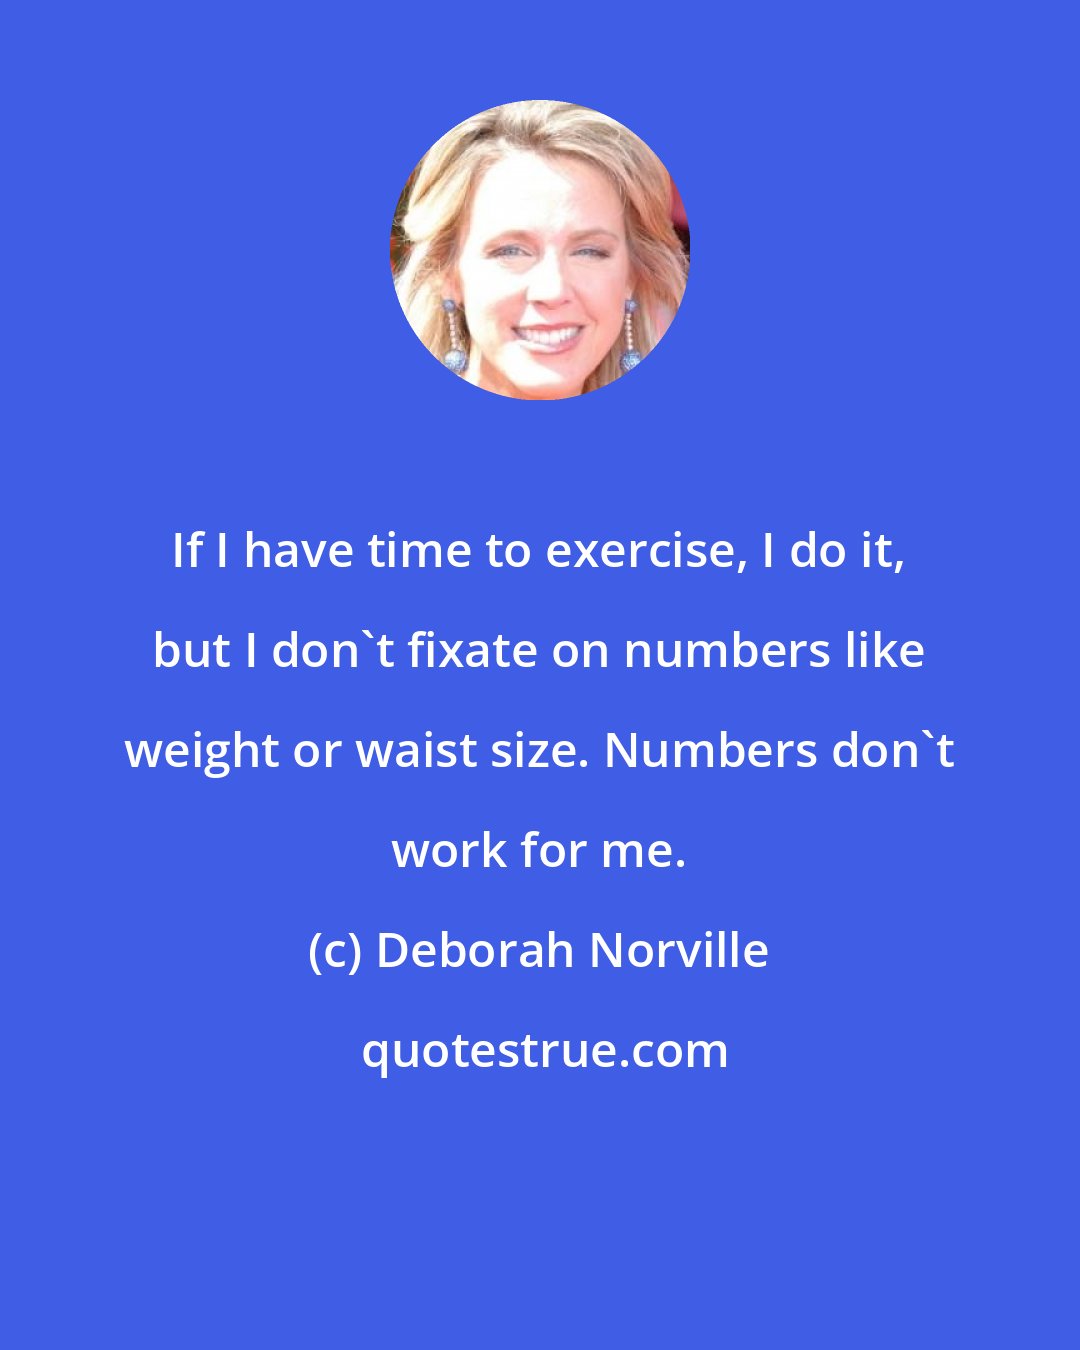 Deborah Norville: If I have time to exercise, I do it, but I don't fixate on numbers like weight or waist size. Numbers don't work for me.